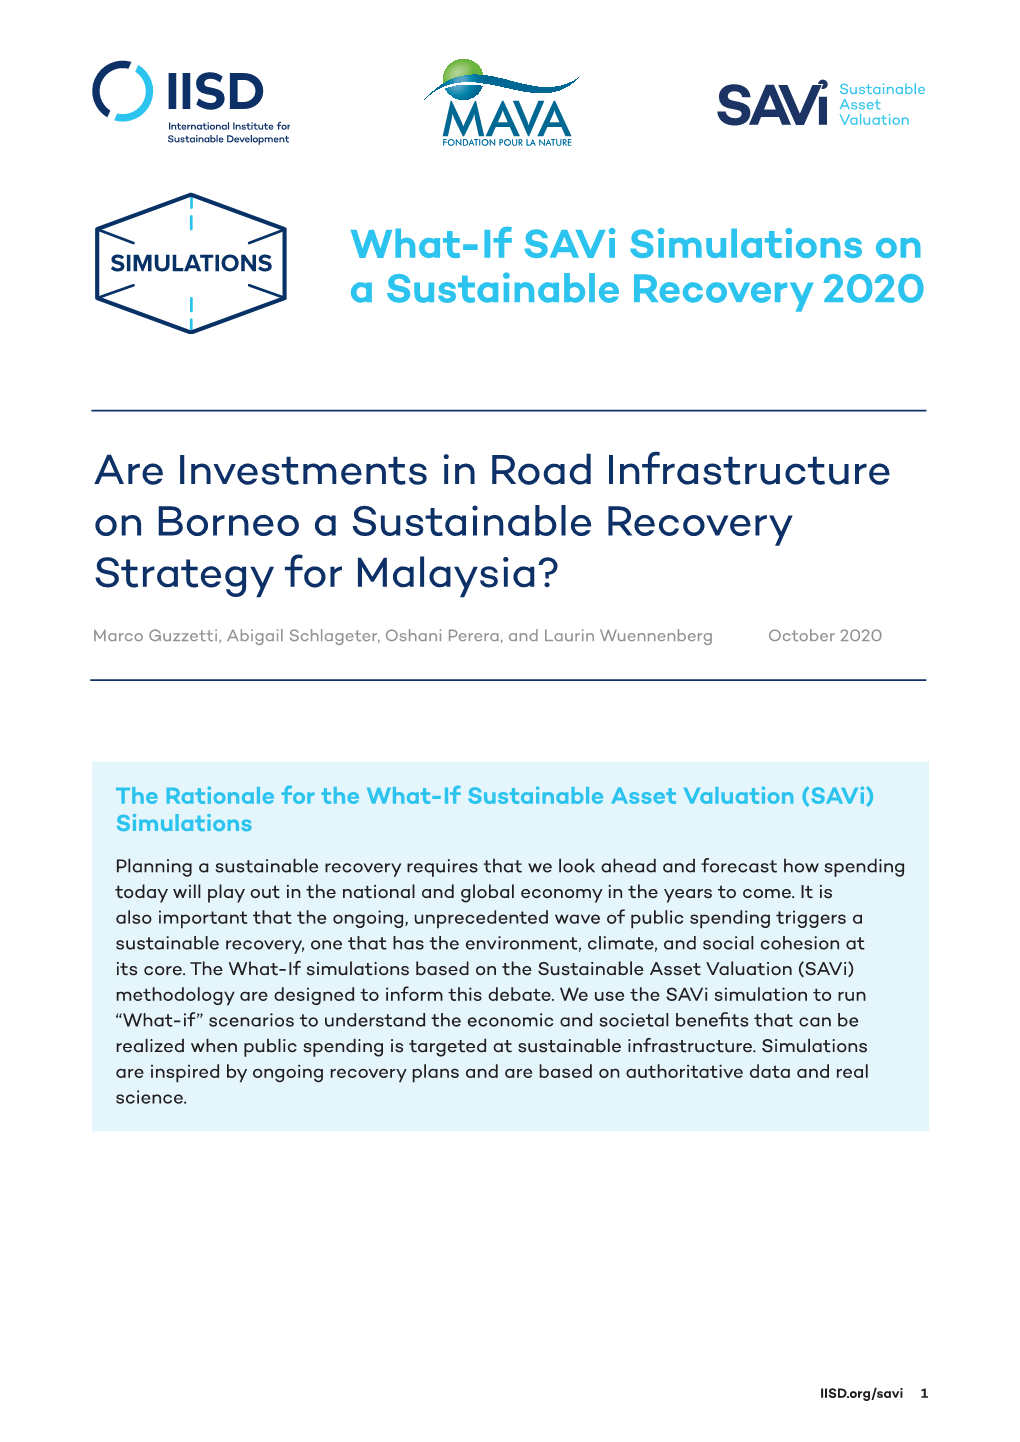 Are Investments in Road Infrastructure on Borneo a Sustainable Recovery Strategy for Malaysia?